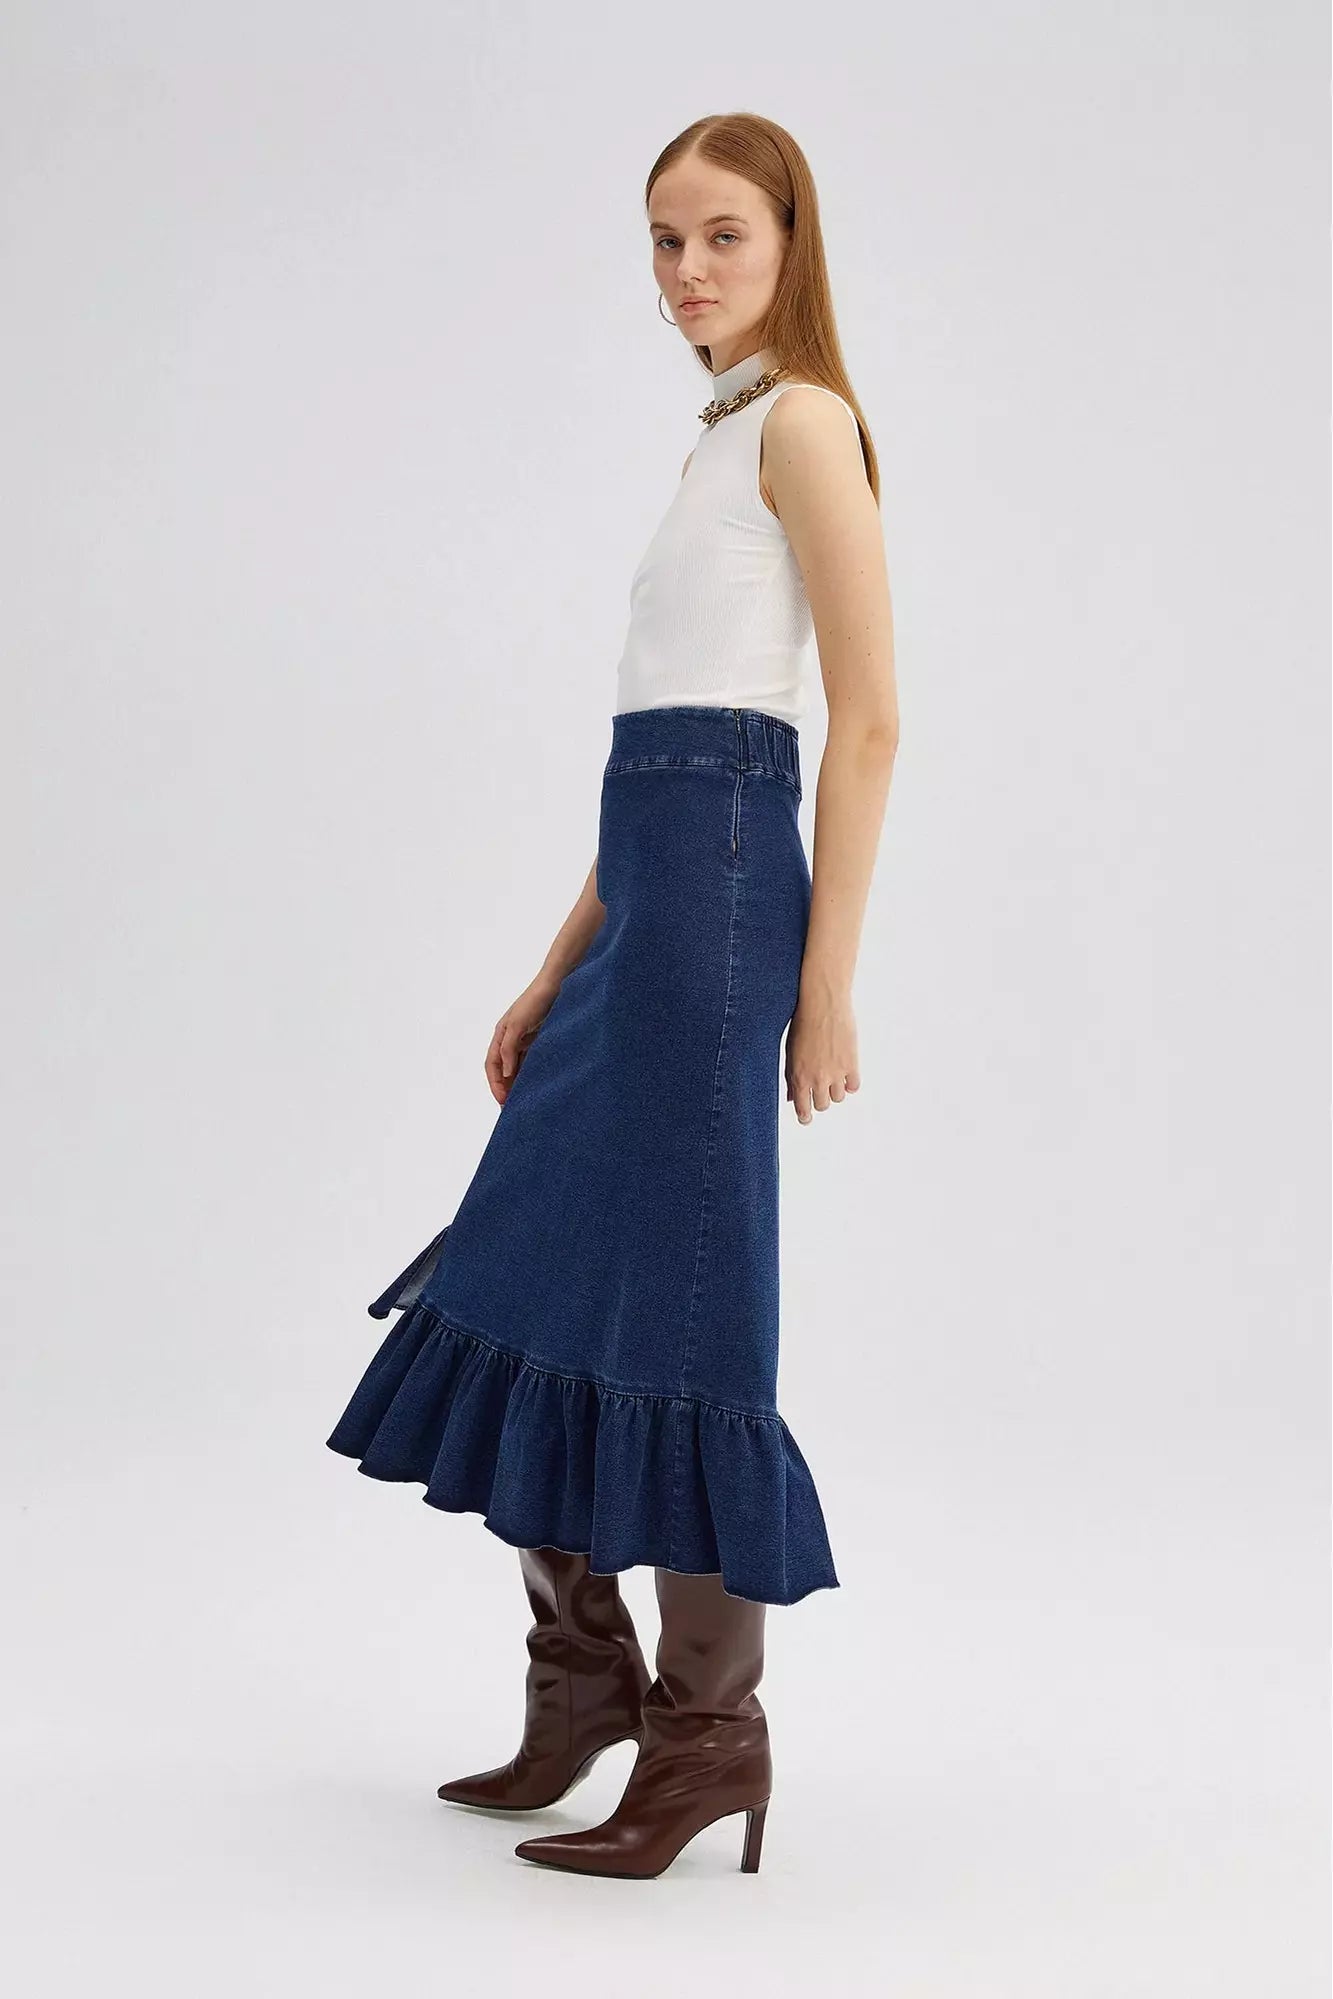 Denim Skirt with Side Details - By Baano